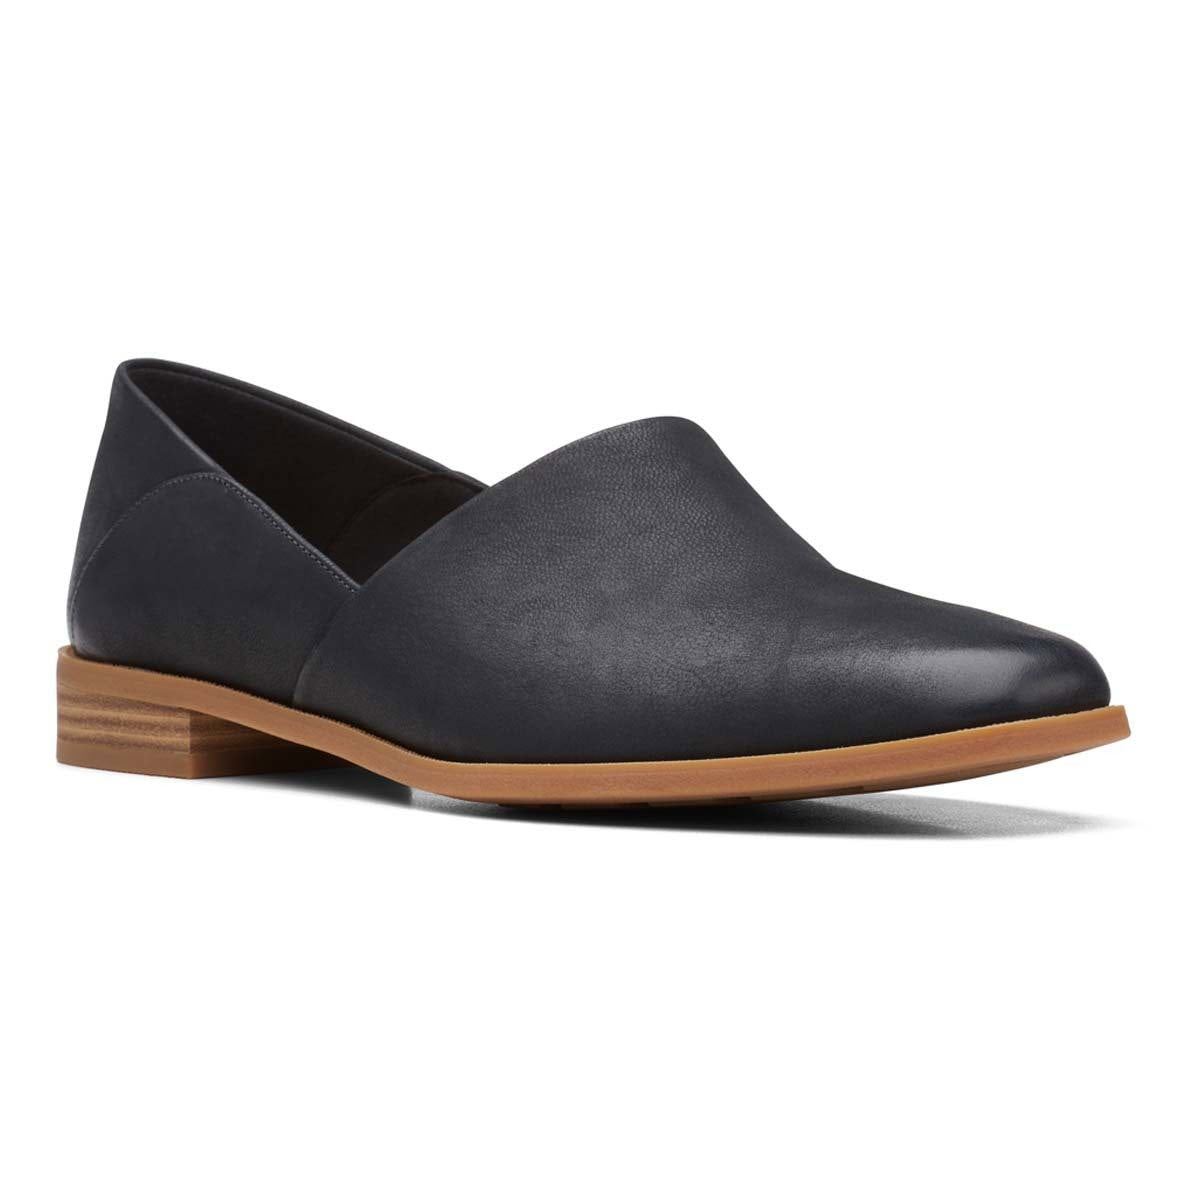 A Clarks Pure Belle black leather loafer with a low wooden heel and a slip-on design, featuring a Contour Cushion footbed, displayed against a white background.